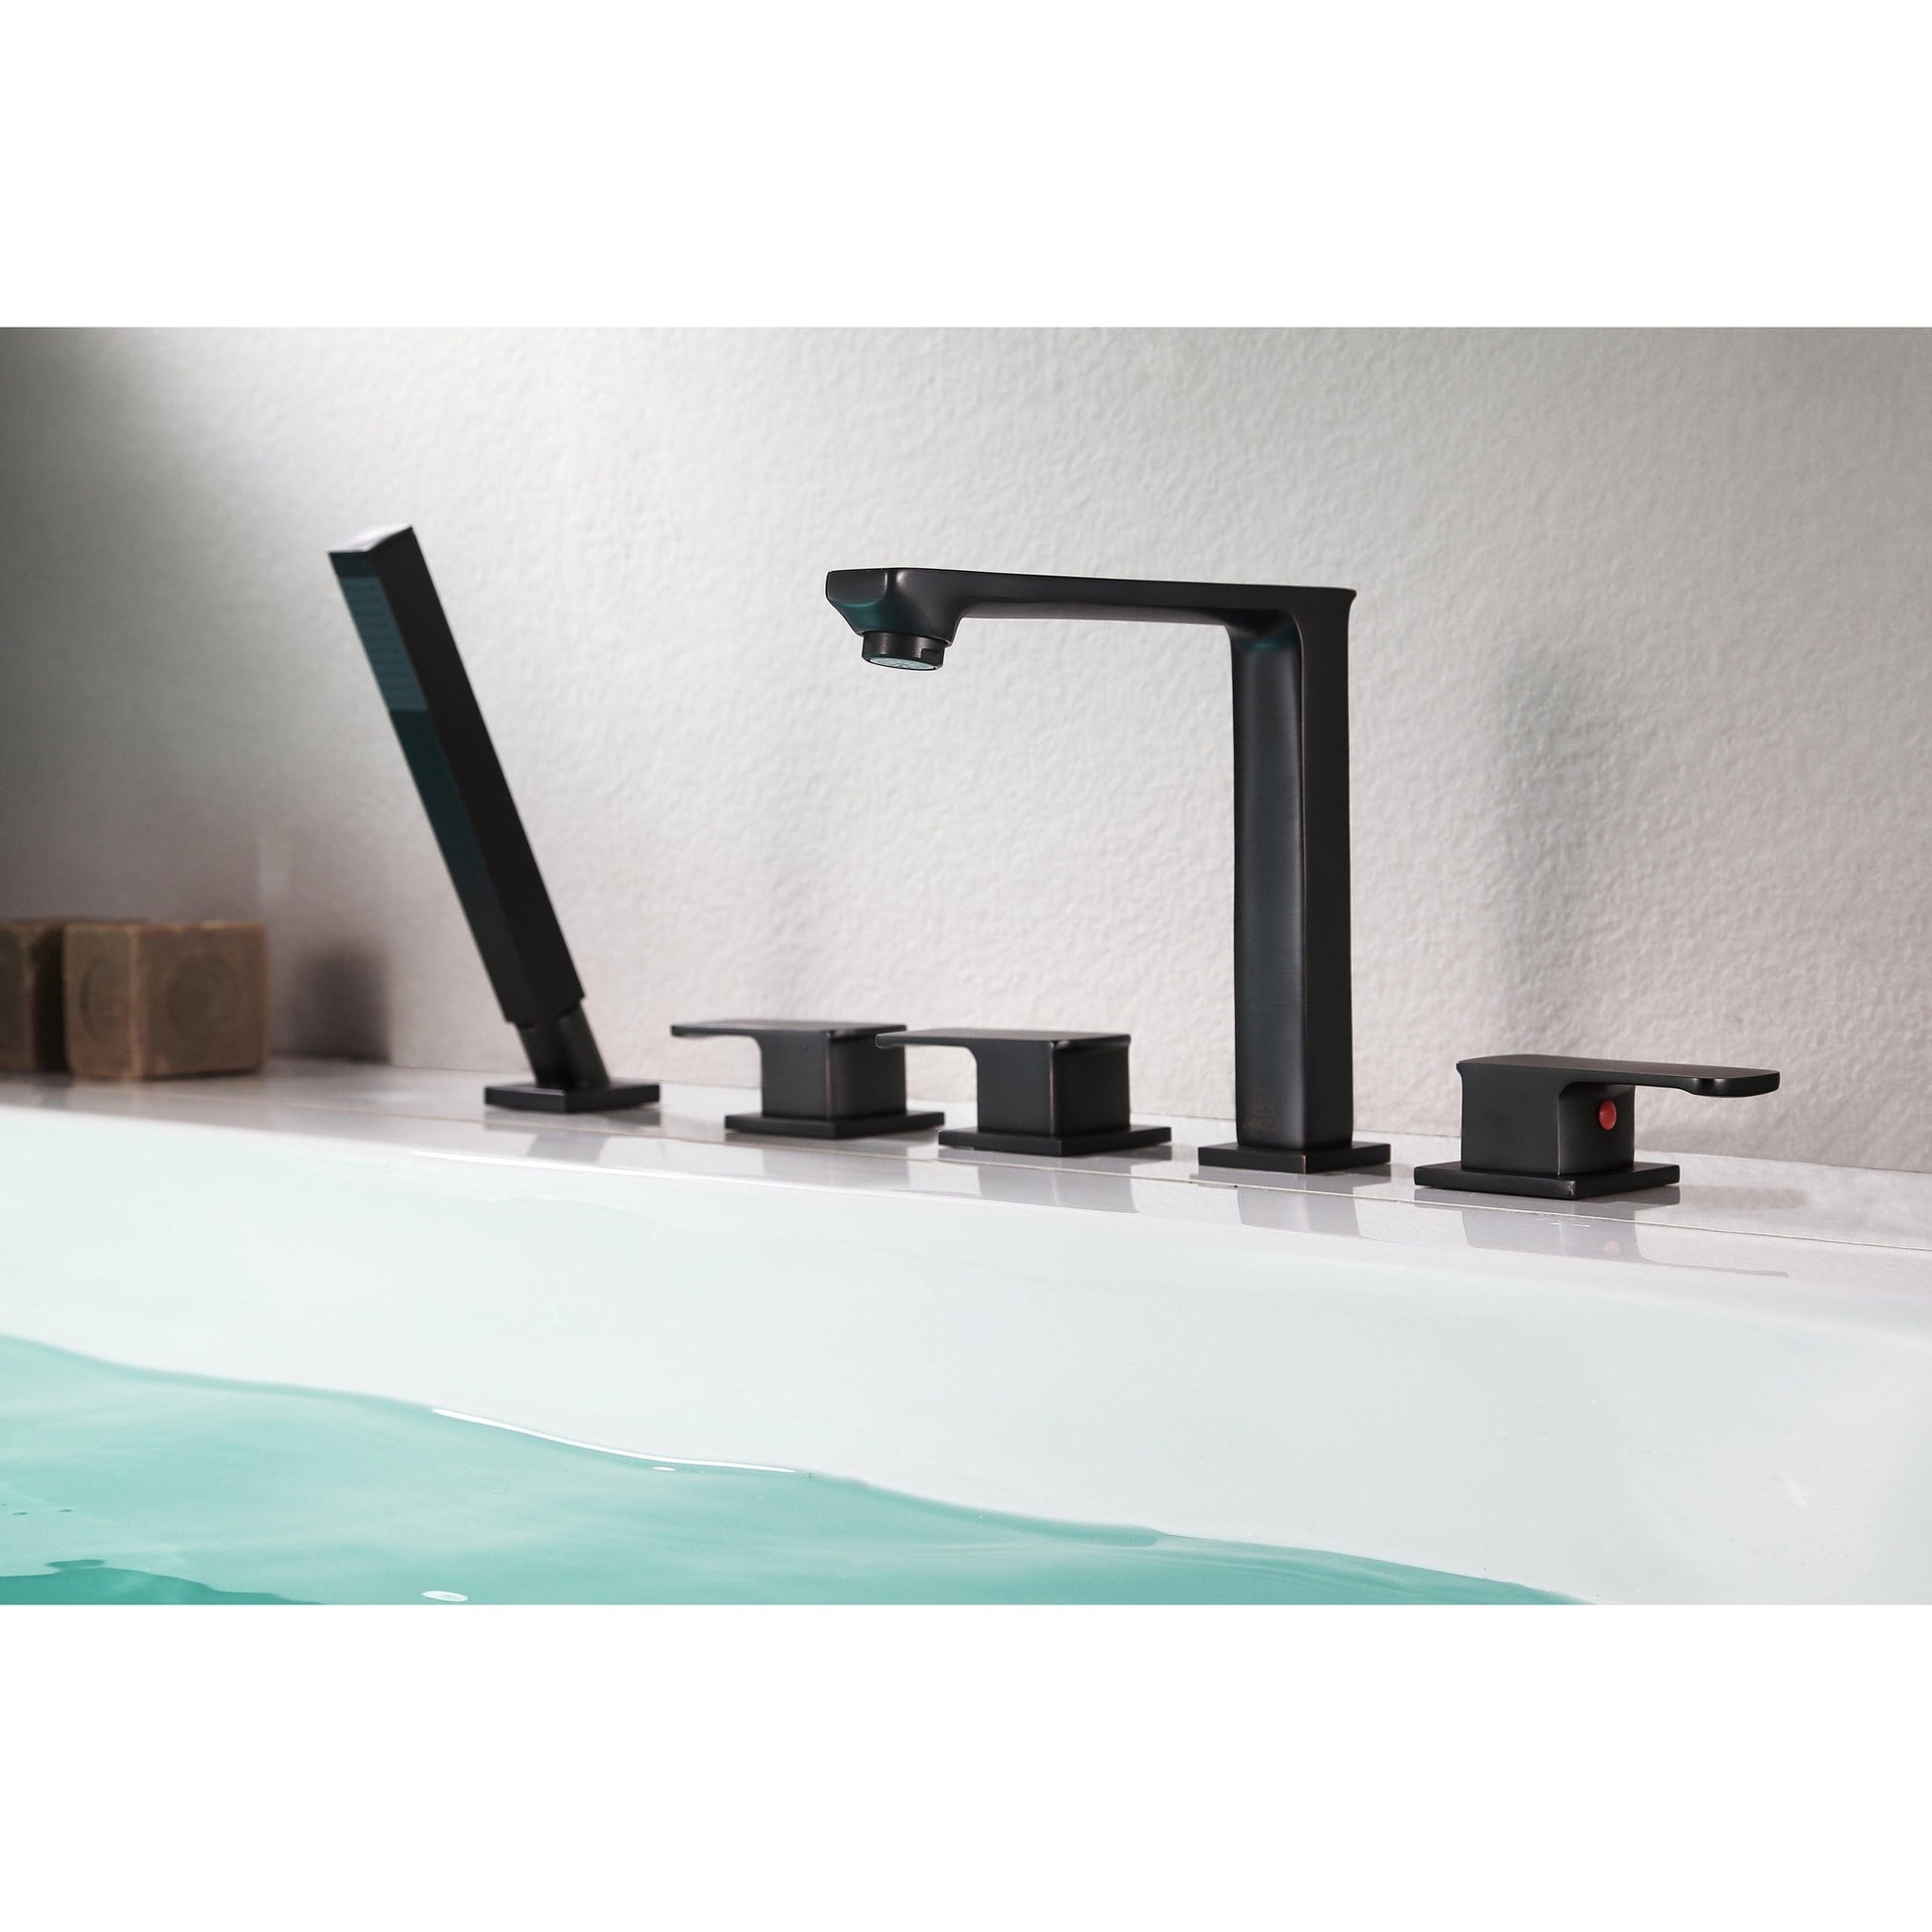 ANZZI Shore Series 3-Handle Oil Rubbed Bronze Roman Tub Faucet With Euro-Grip Handheld Sprayer